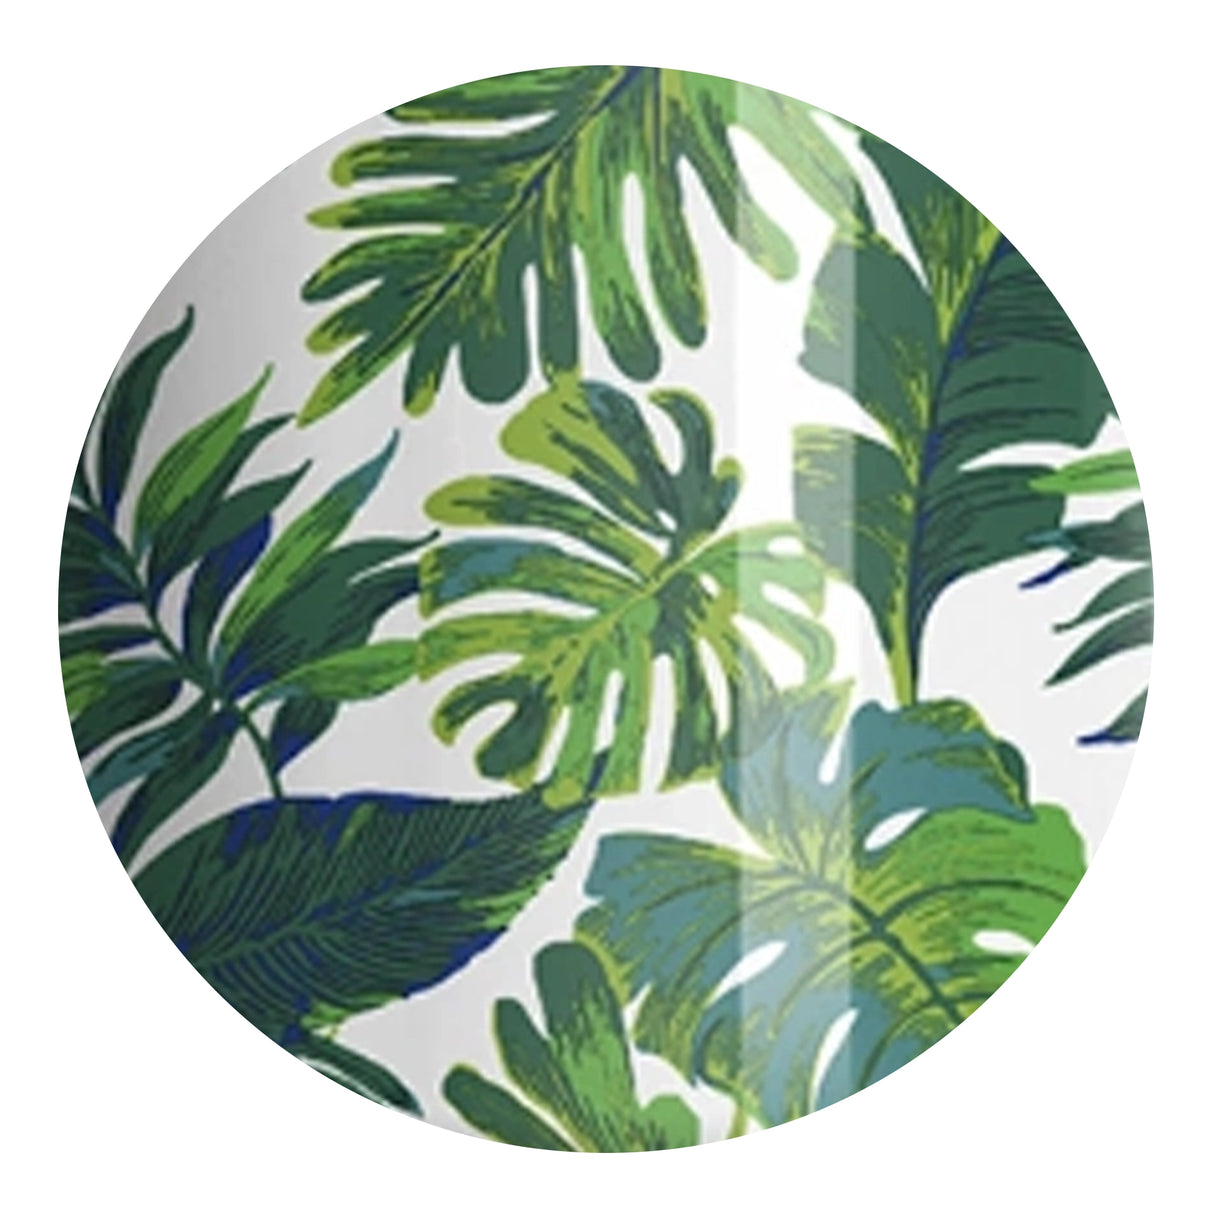 hydro sublimation transfer paper green tropic leaves